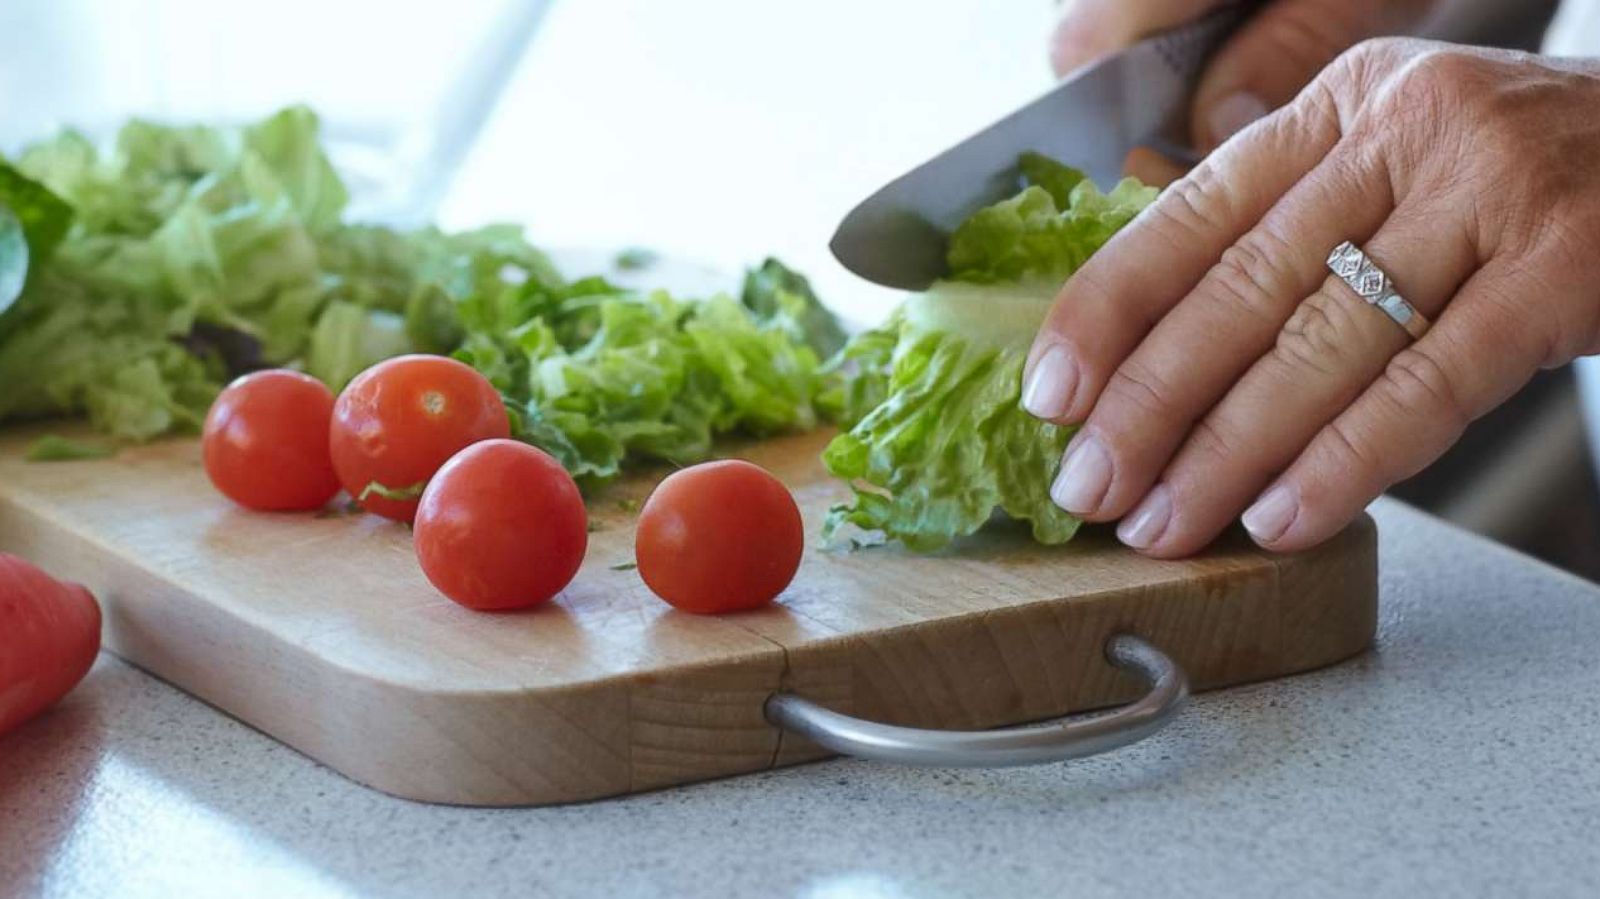 PHOTO: In this undated stock photo, a woman cuts up romaine lettuce on a cutting board for a salad.